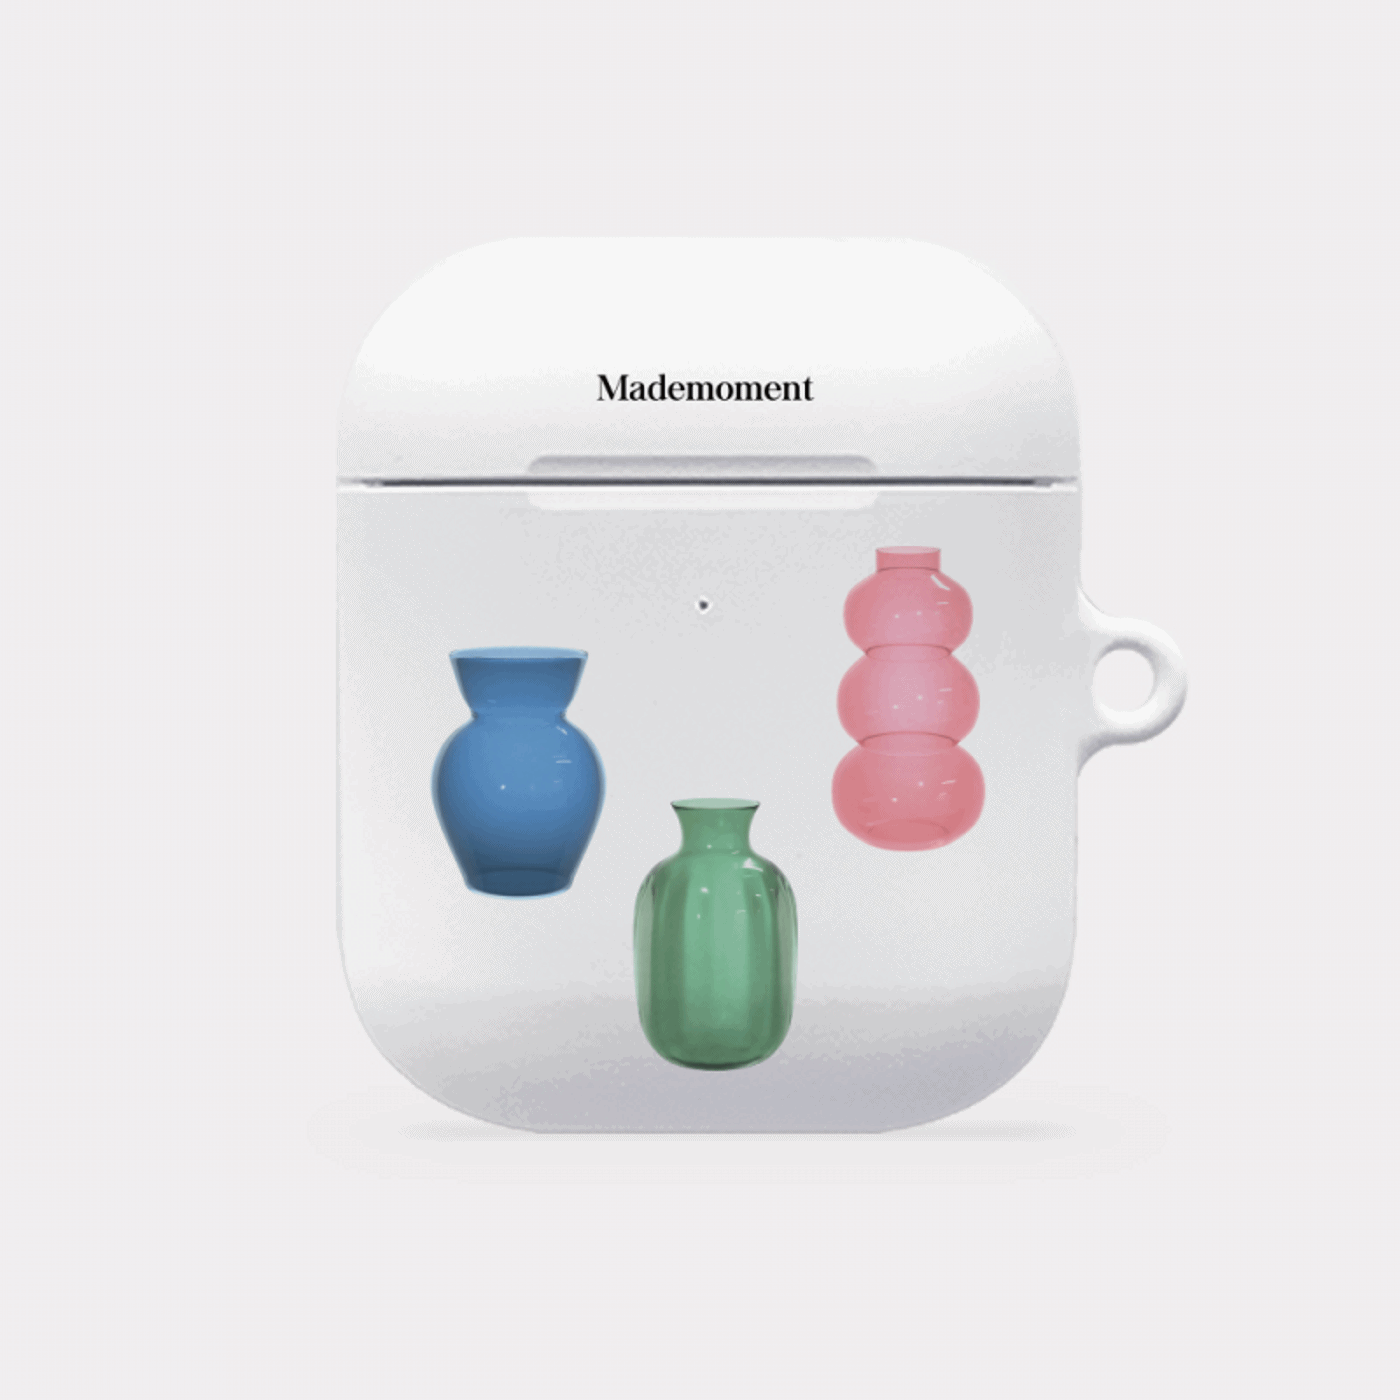 shapes of vases design [hard airpods case series]